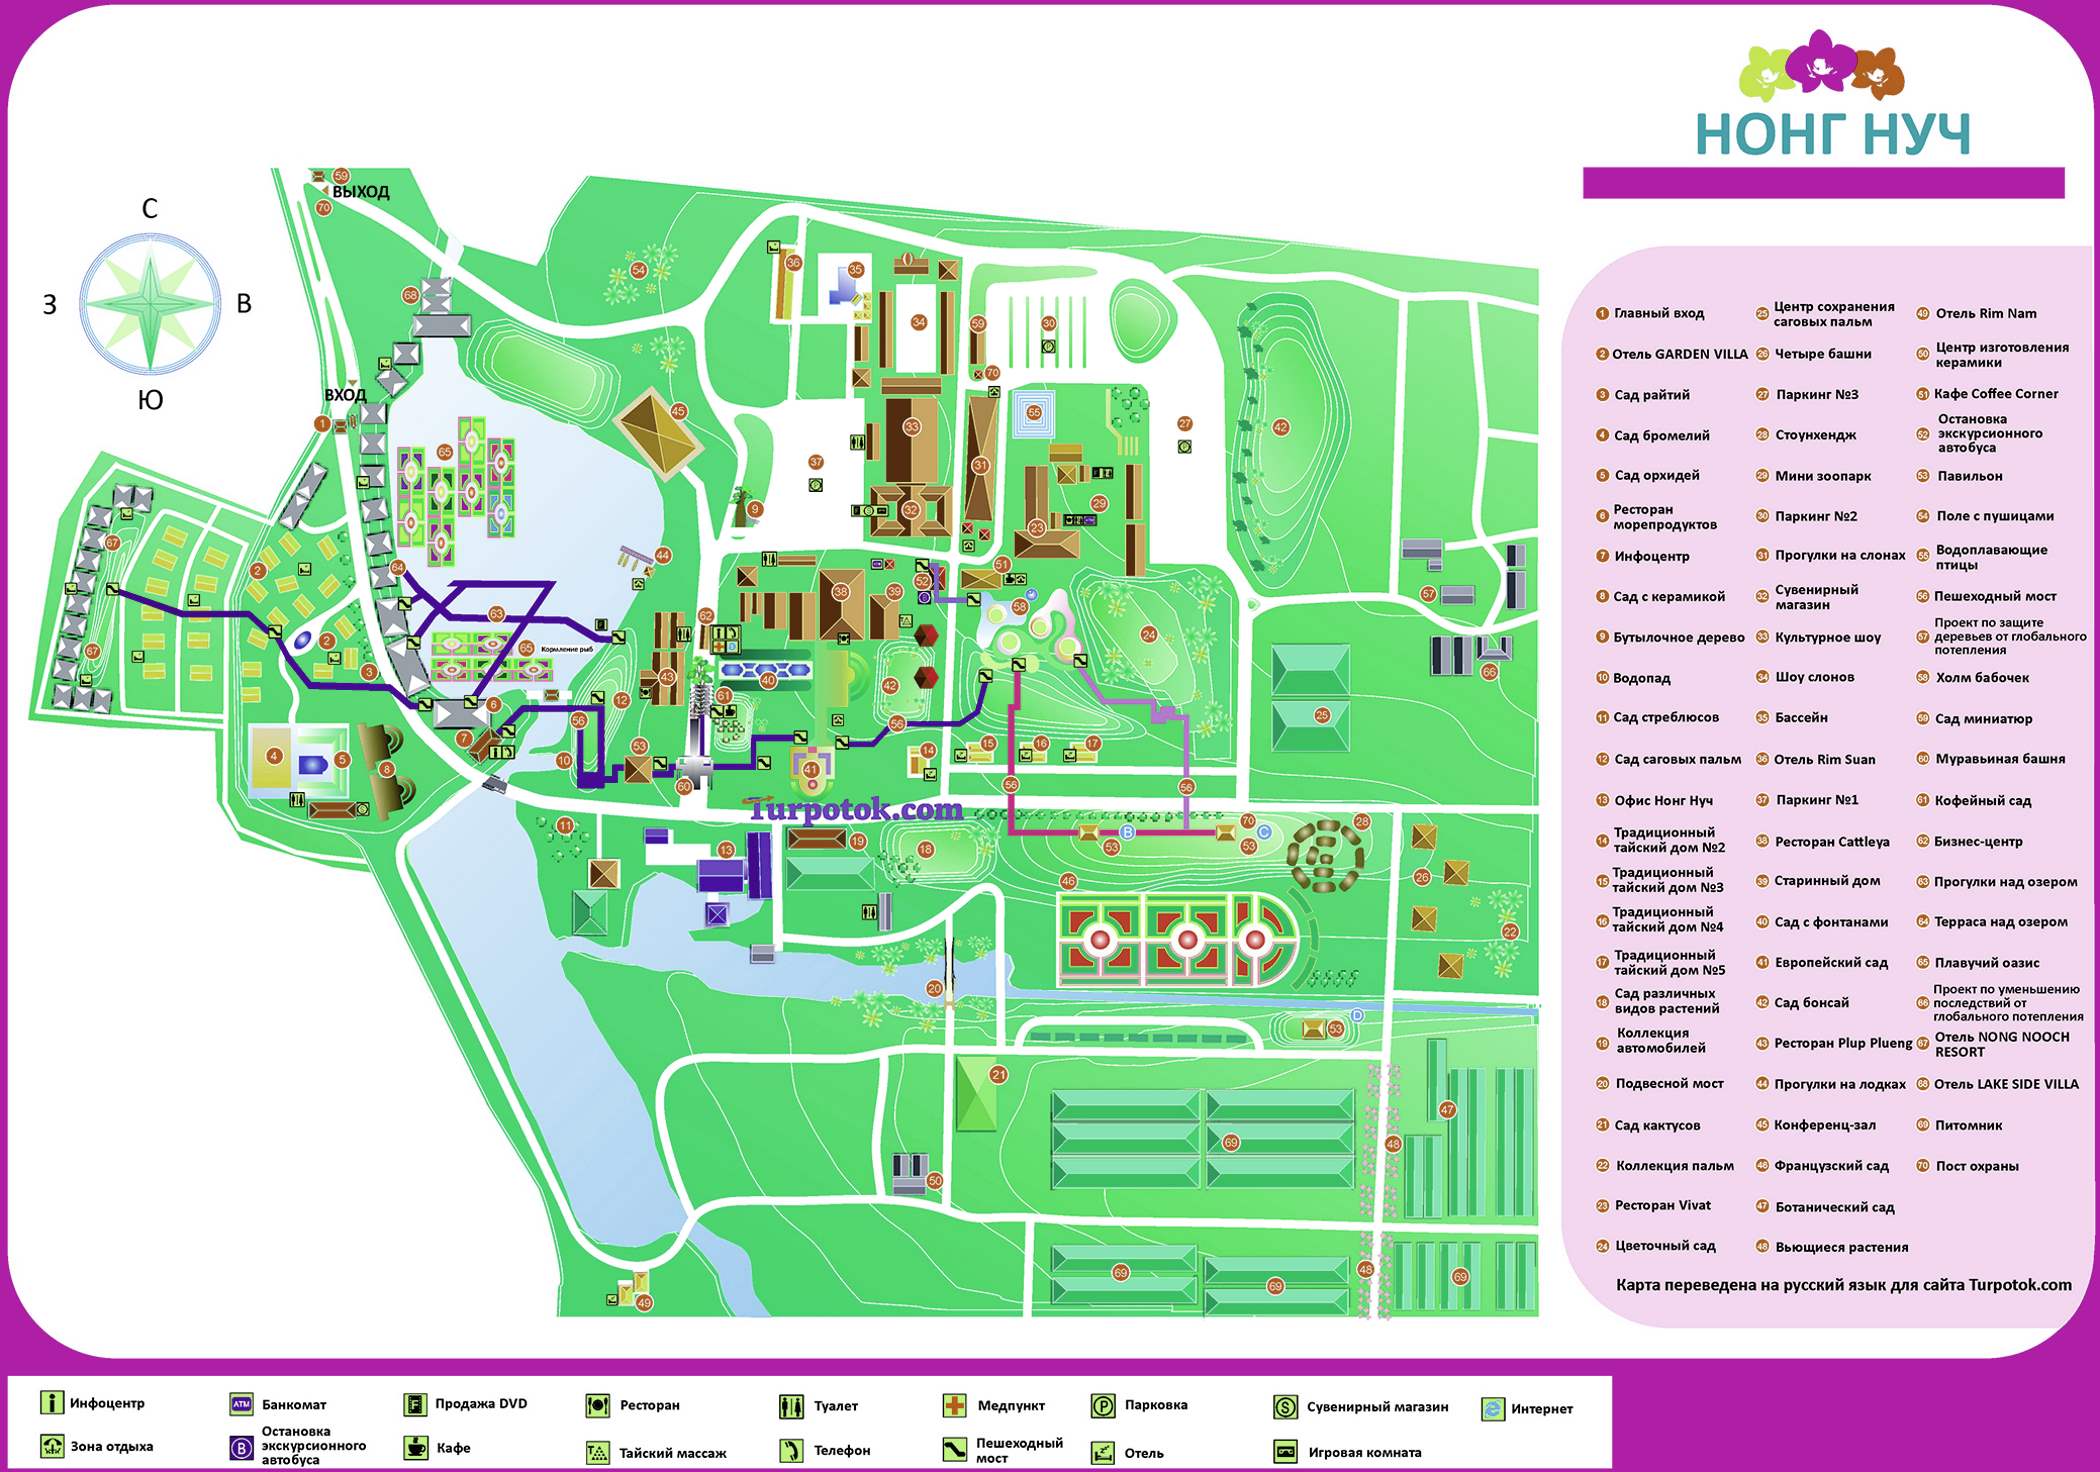 Detailed map of Nong Nooch Park